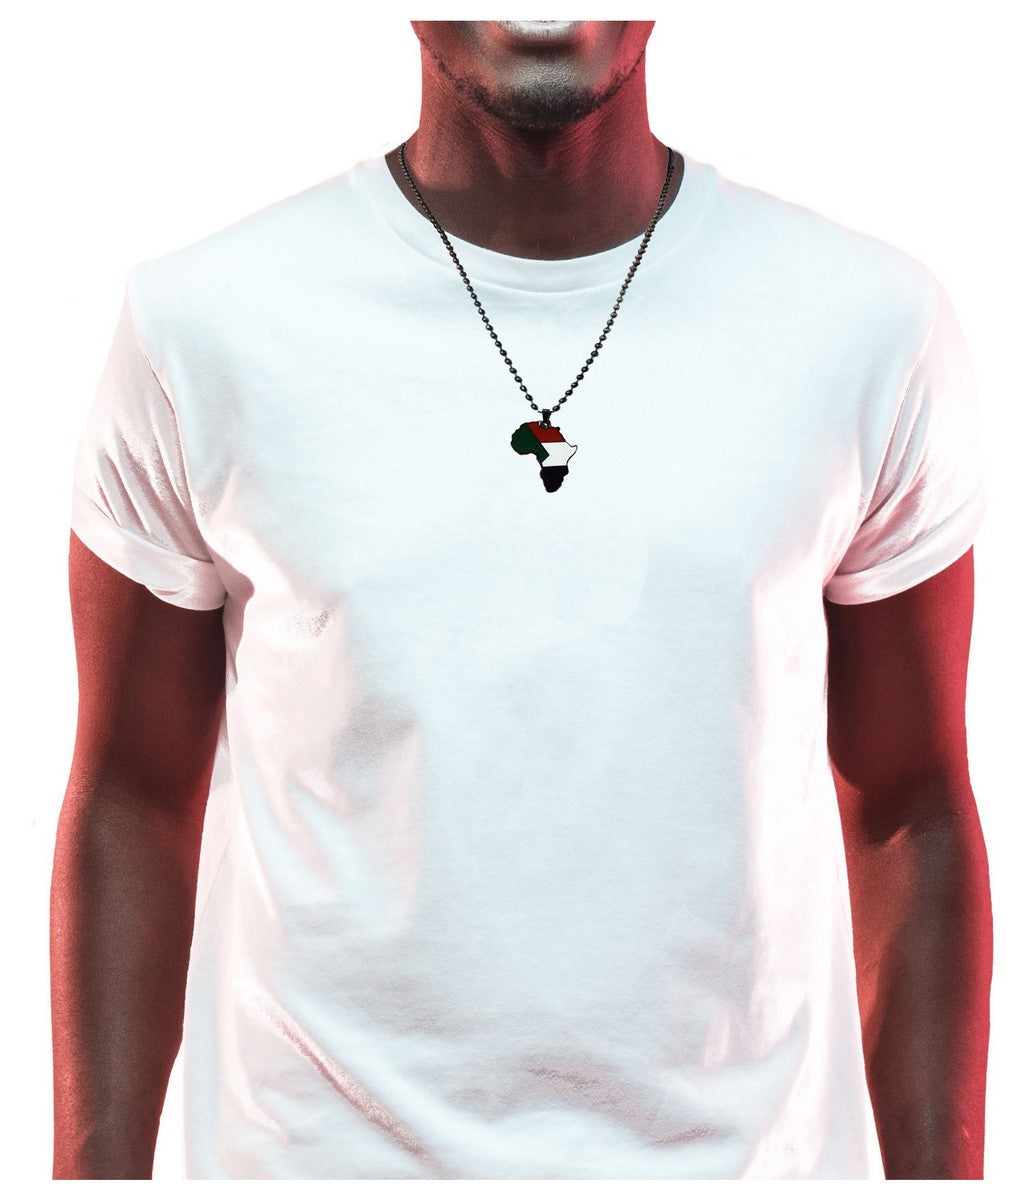 Sudan Flag Pendant Necklace Africa Map Necklace